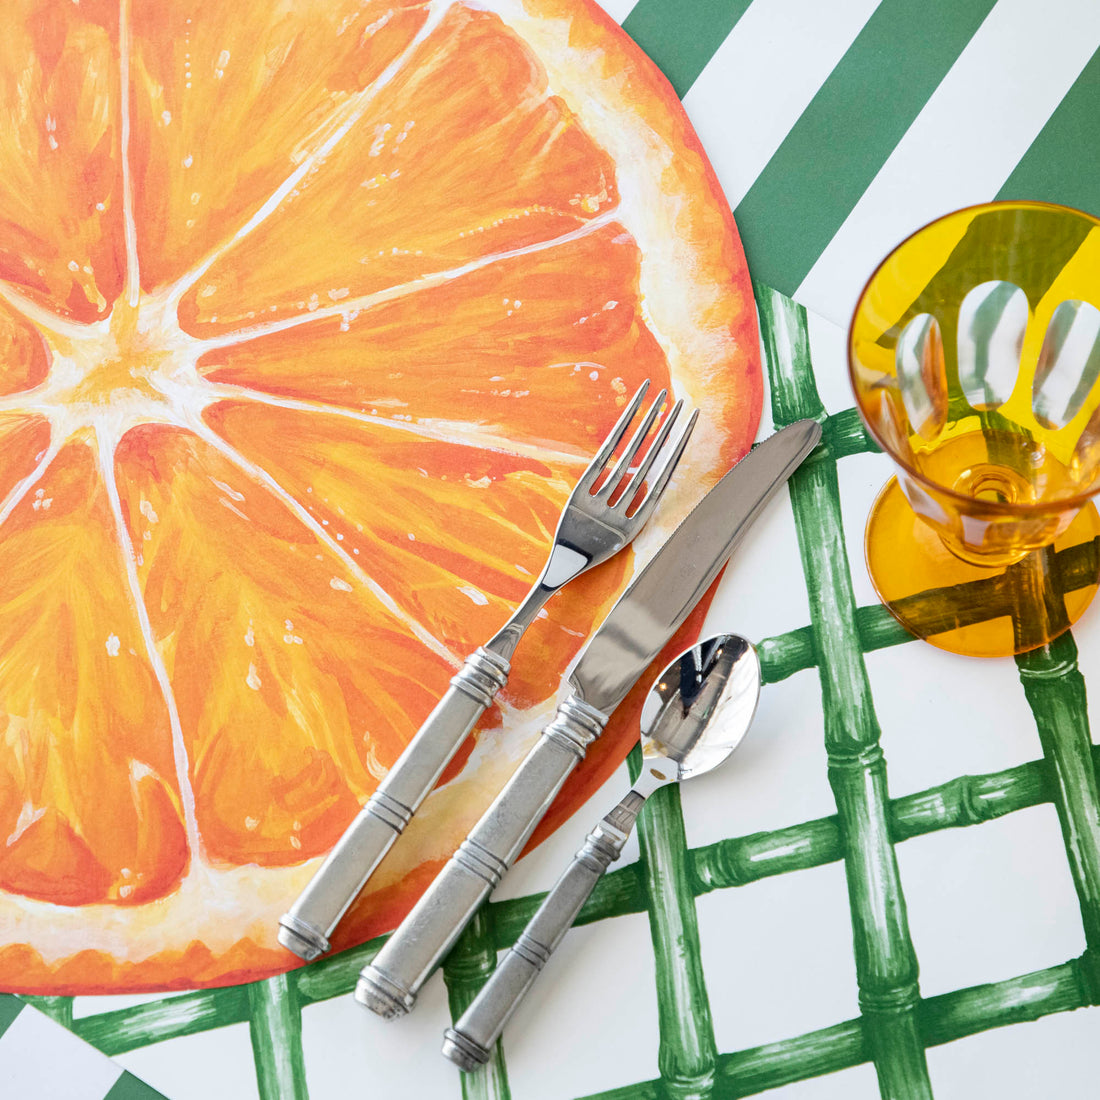 The Green Lattice Placemat paired with an Orange Slice Die-Cut Placemat under a summer-themed place setting.